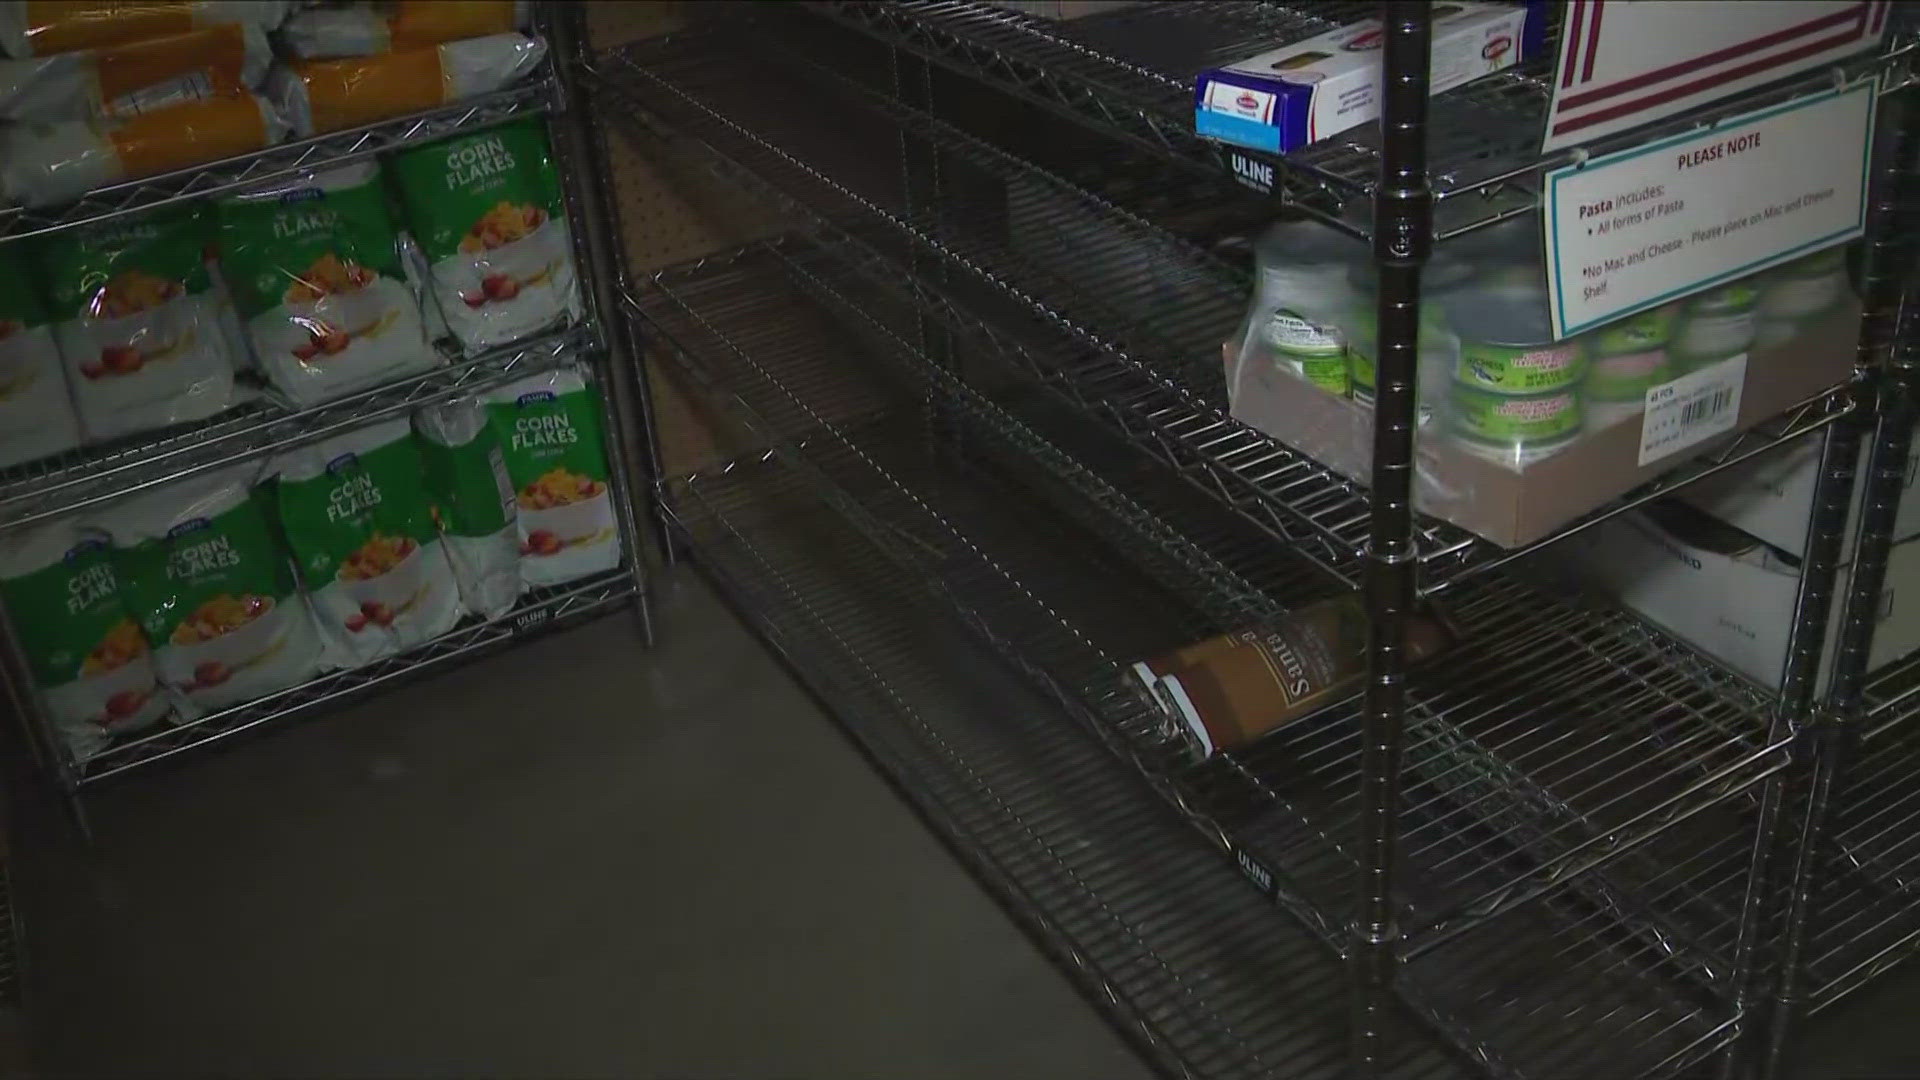 House of Mercy food pantry is already seeing increased demand now that school is out for the summer.